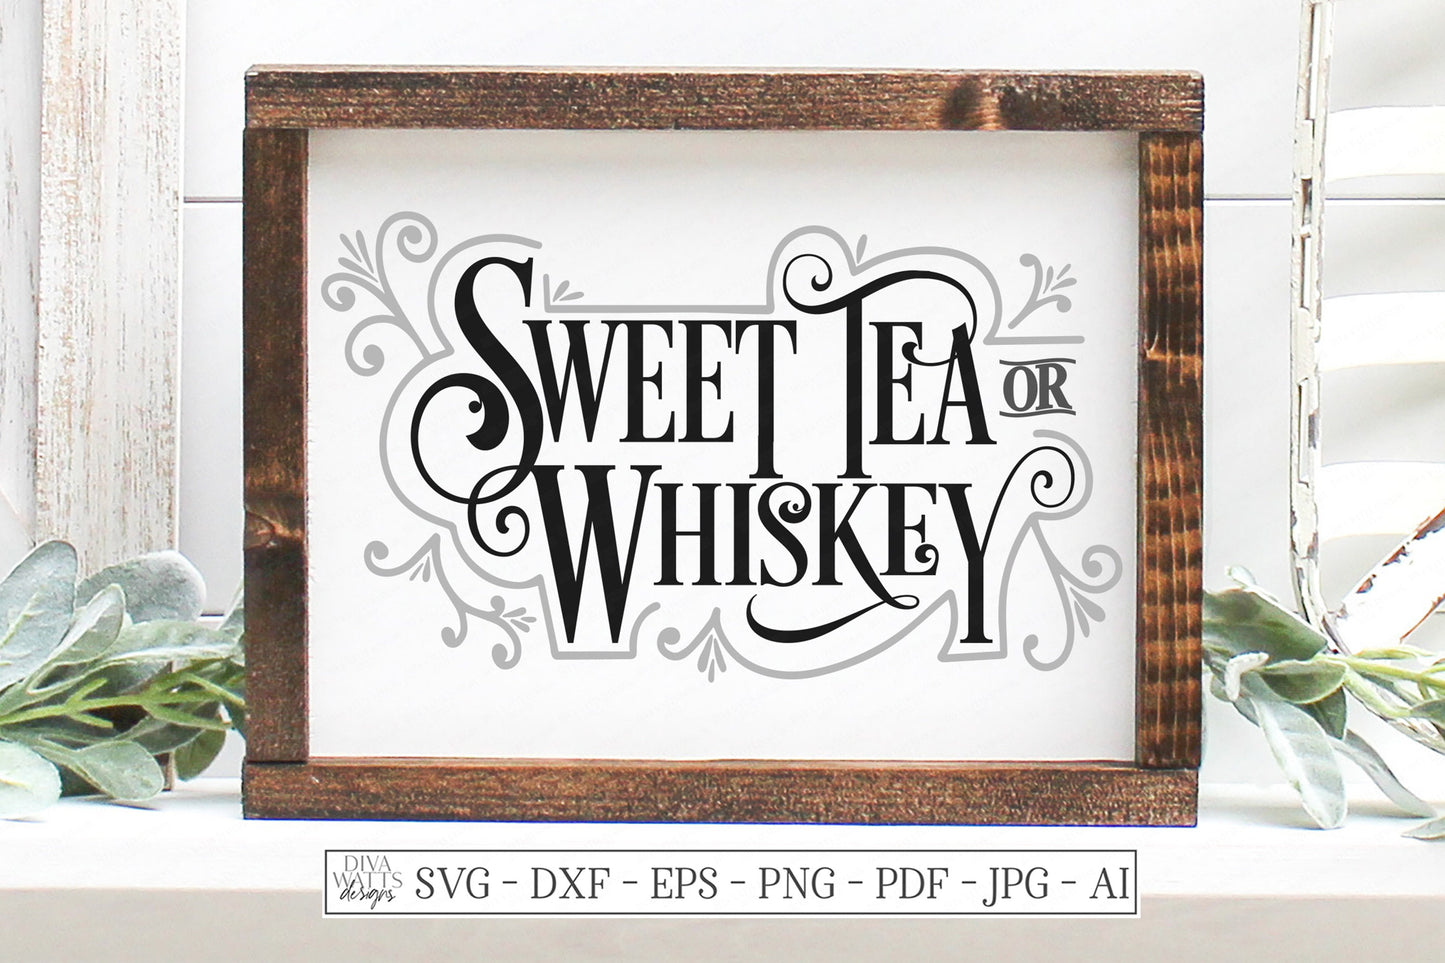 SVG | Sweet Tea Or Whiskey | Cutting File | Farmhouse Rustic Ornate Southern Kitchen Sign | Vinyl Stencil HTV | dxf eps jpg | South Vintage